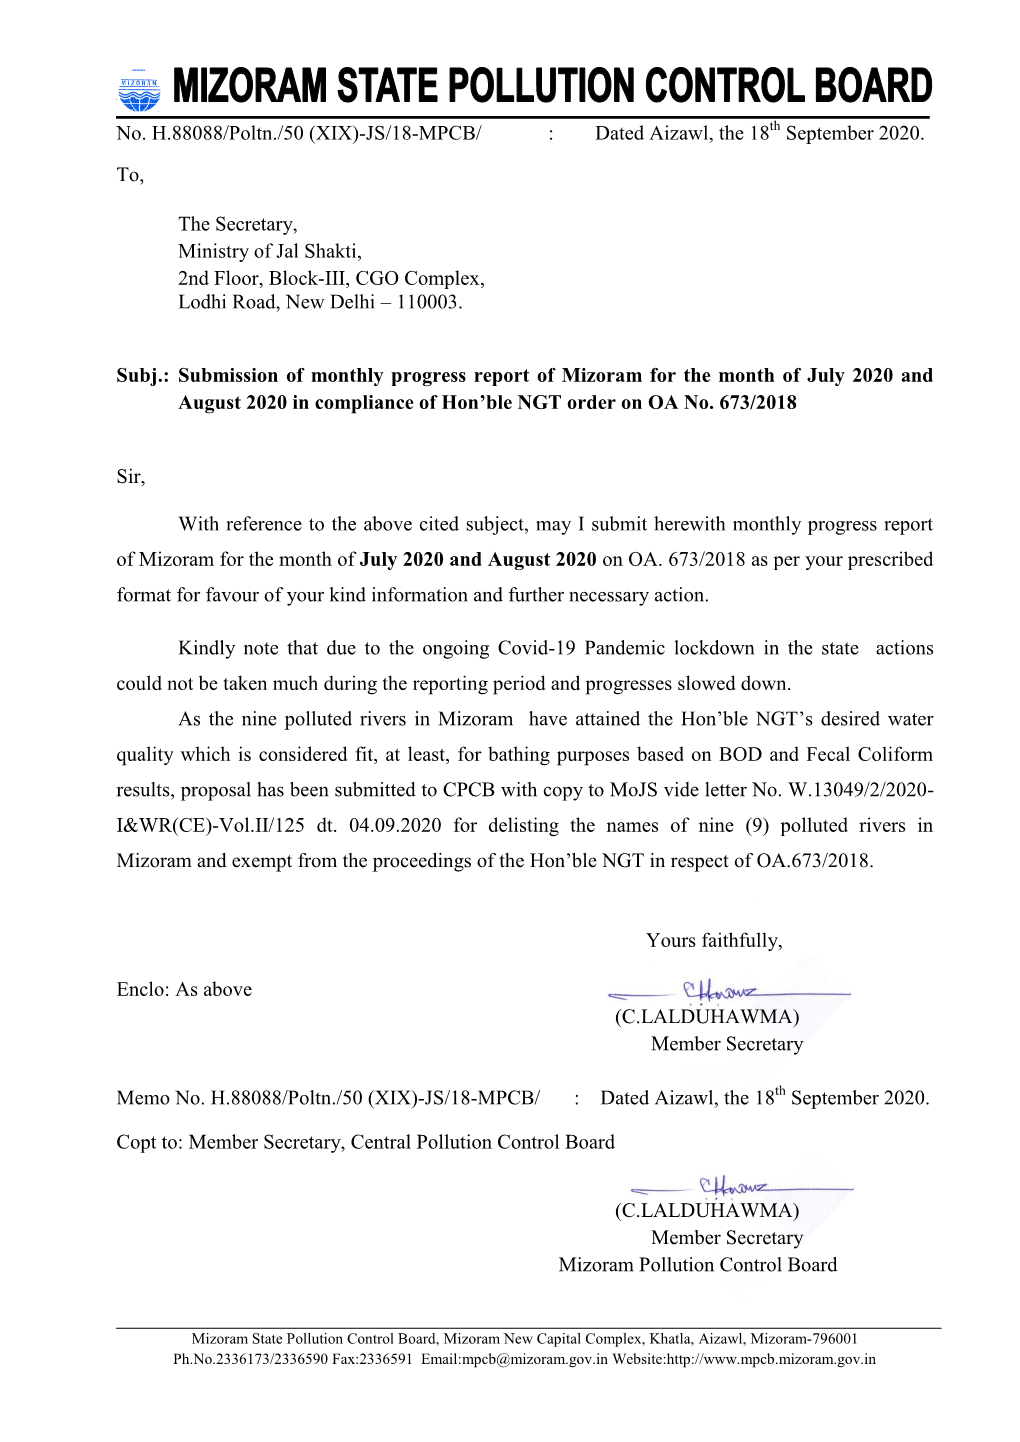 August 2020 in Compliance of Hon’Ble NGT Order on OA No